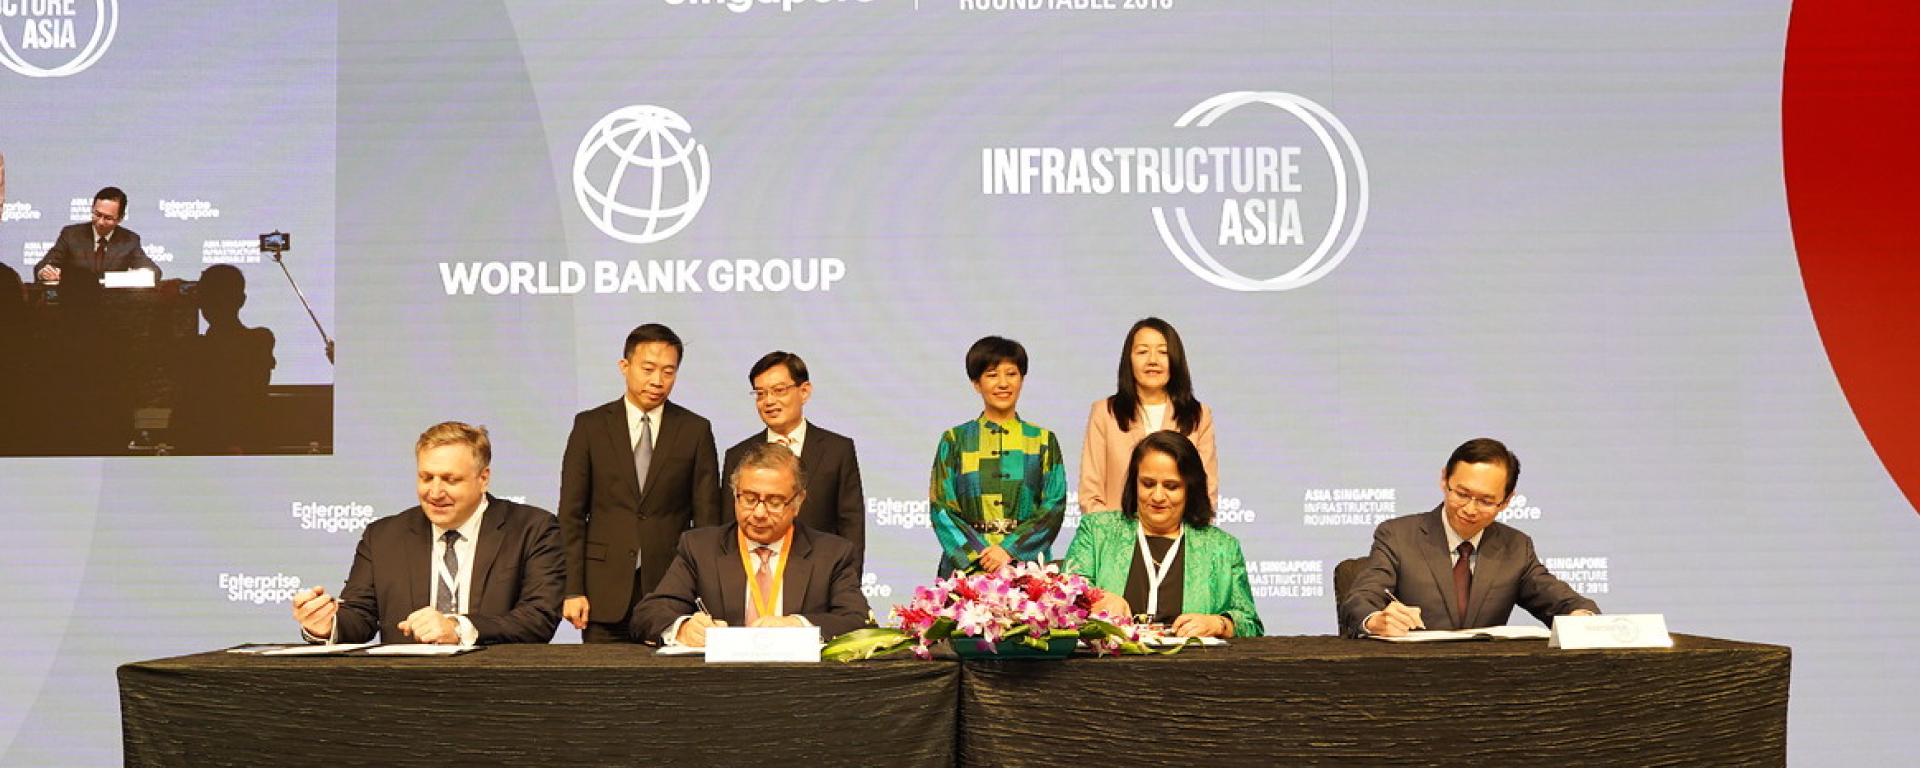 In the News: Infrastructure Asia Launches Officially